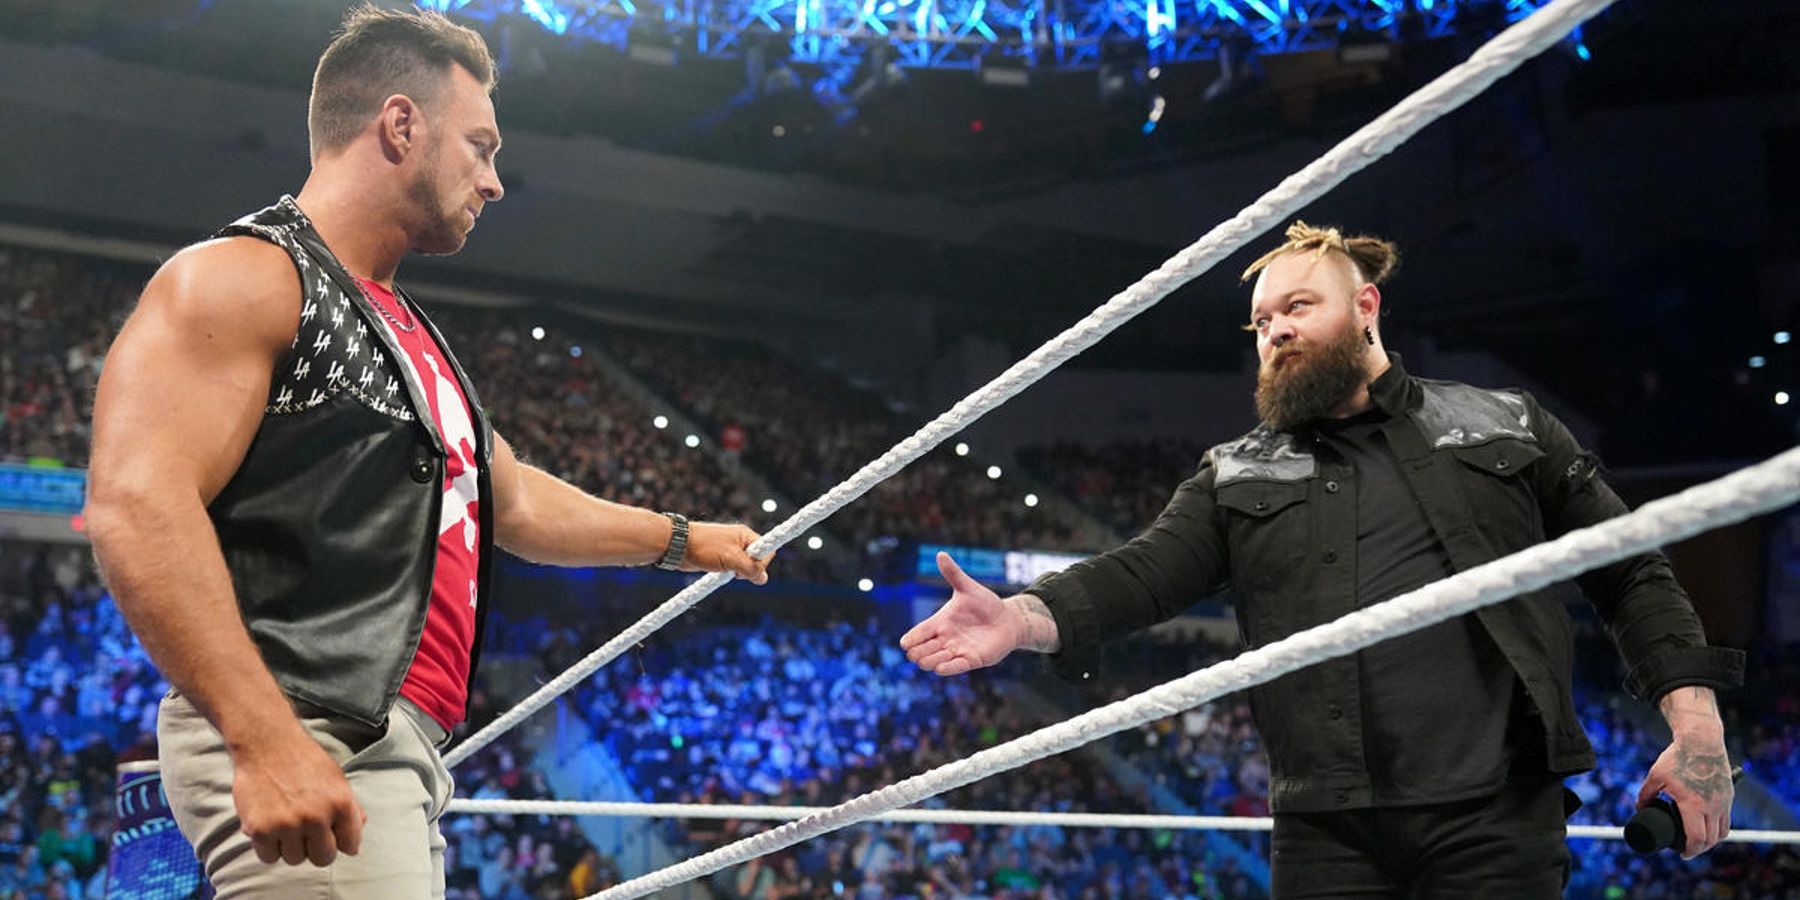 Bray Wyatt attempts to make amends with LA Knight on a recent episode of WWE SmackDown.